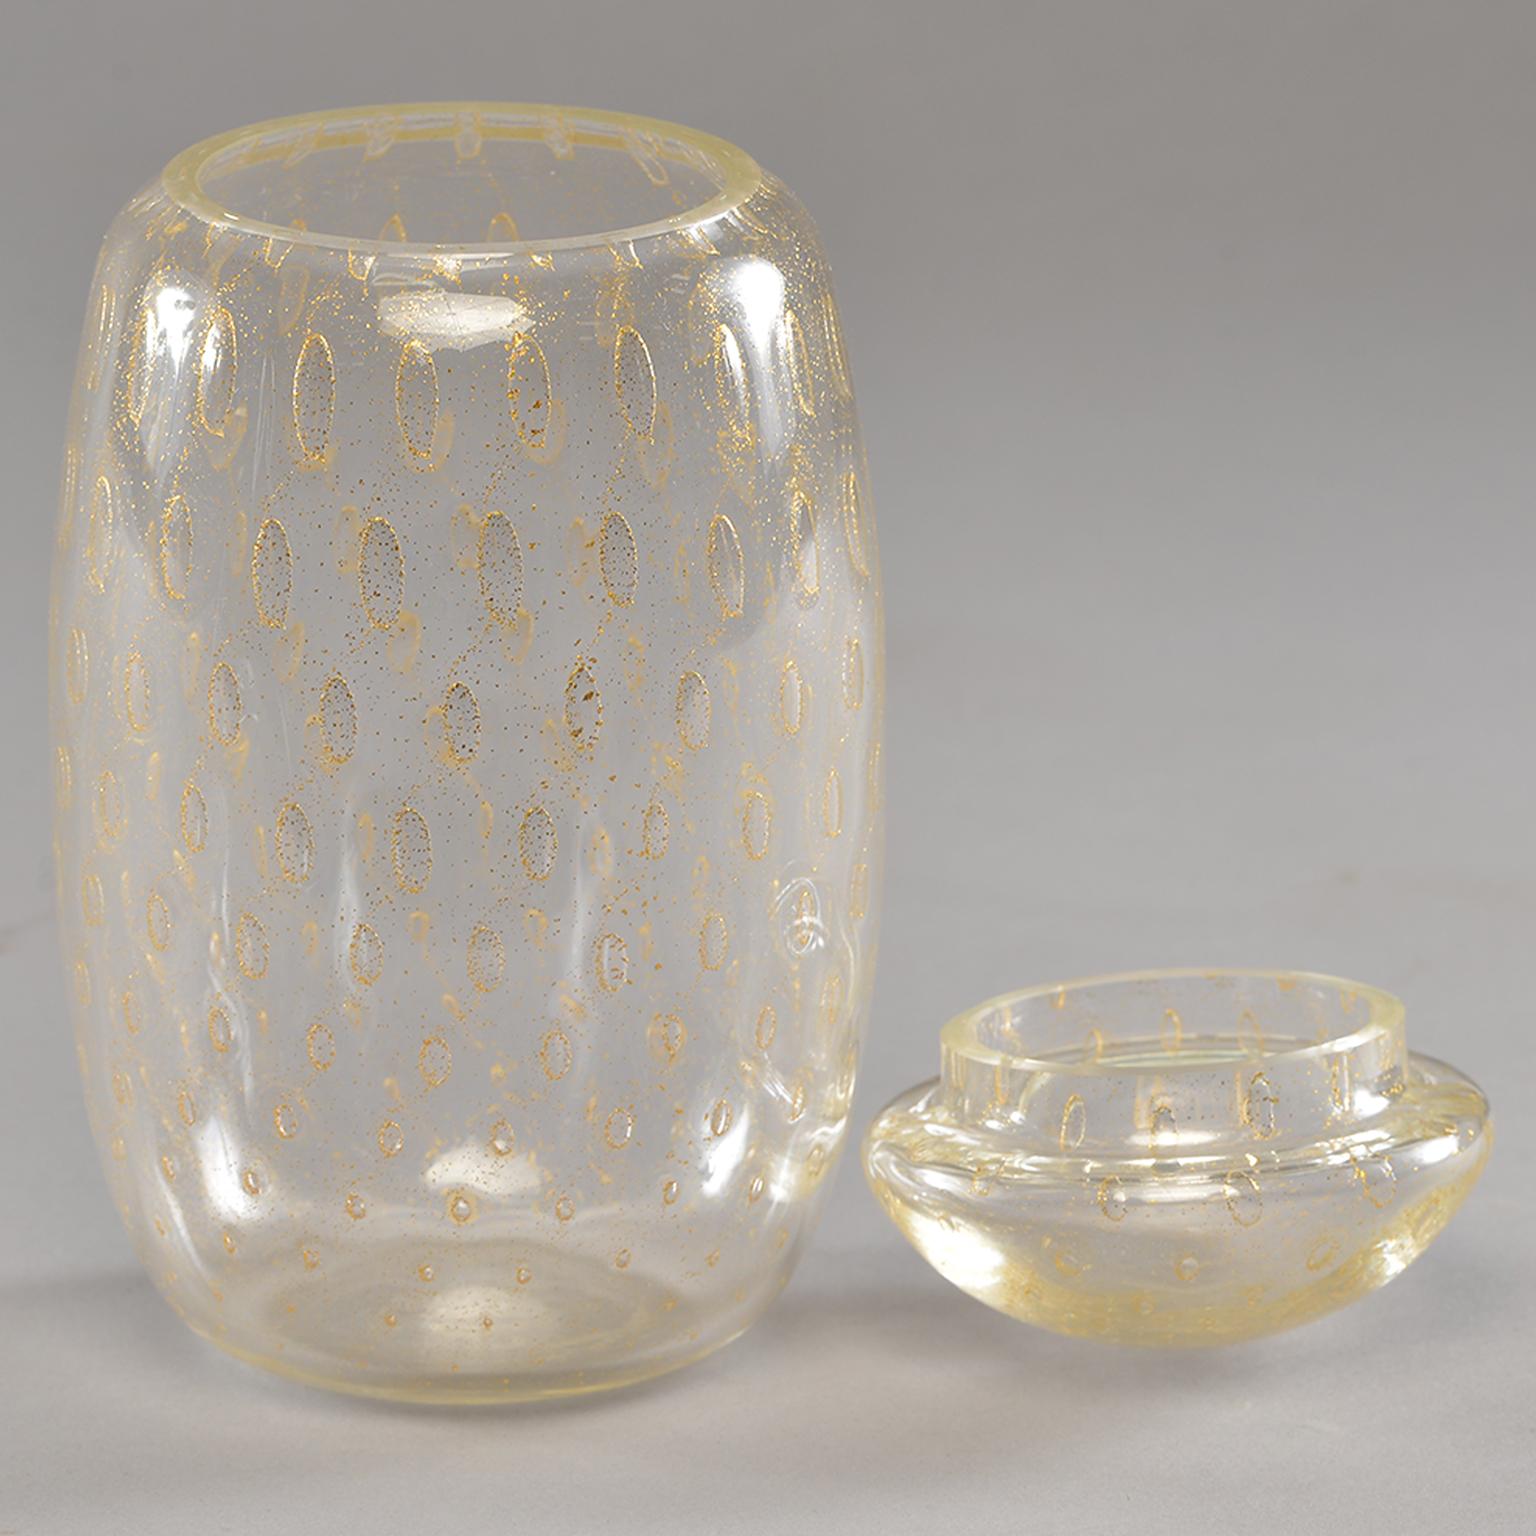 Italian Midcentury Murano Glass Lidded Vessel with Gold Inclusions For Sale